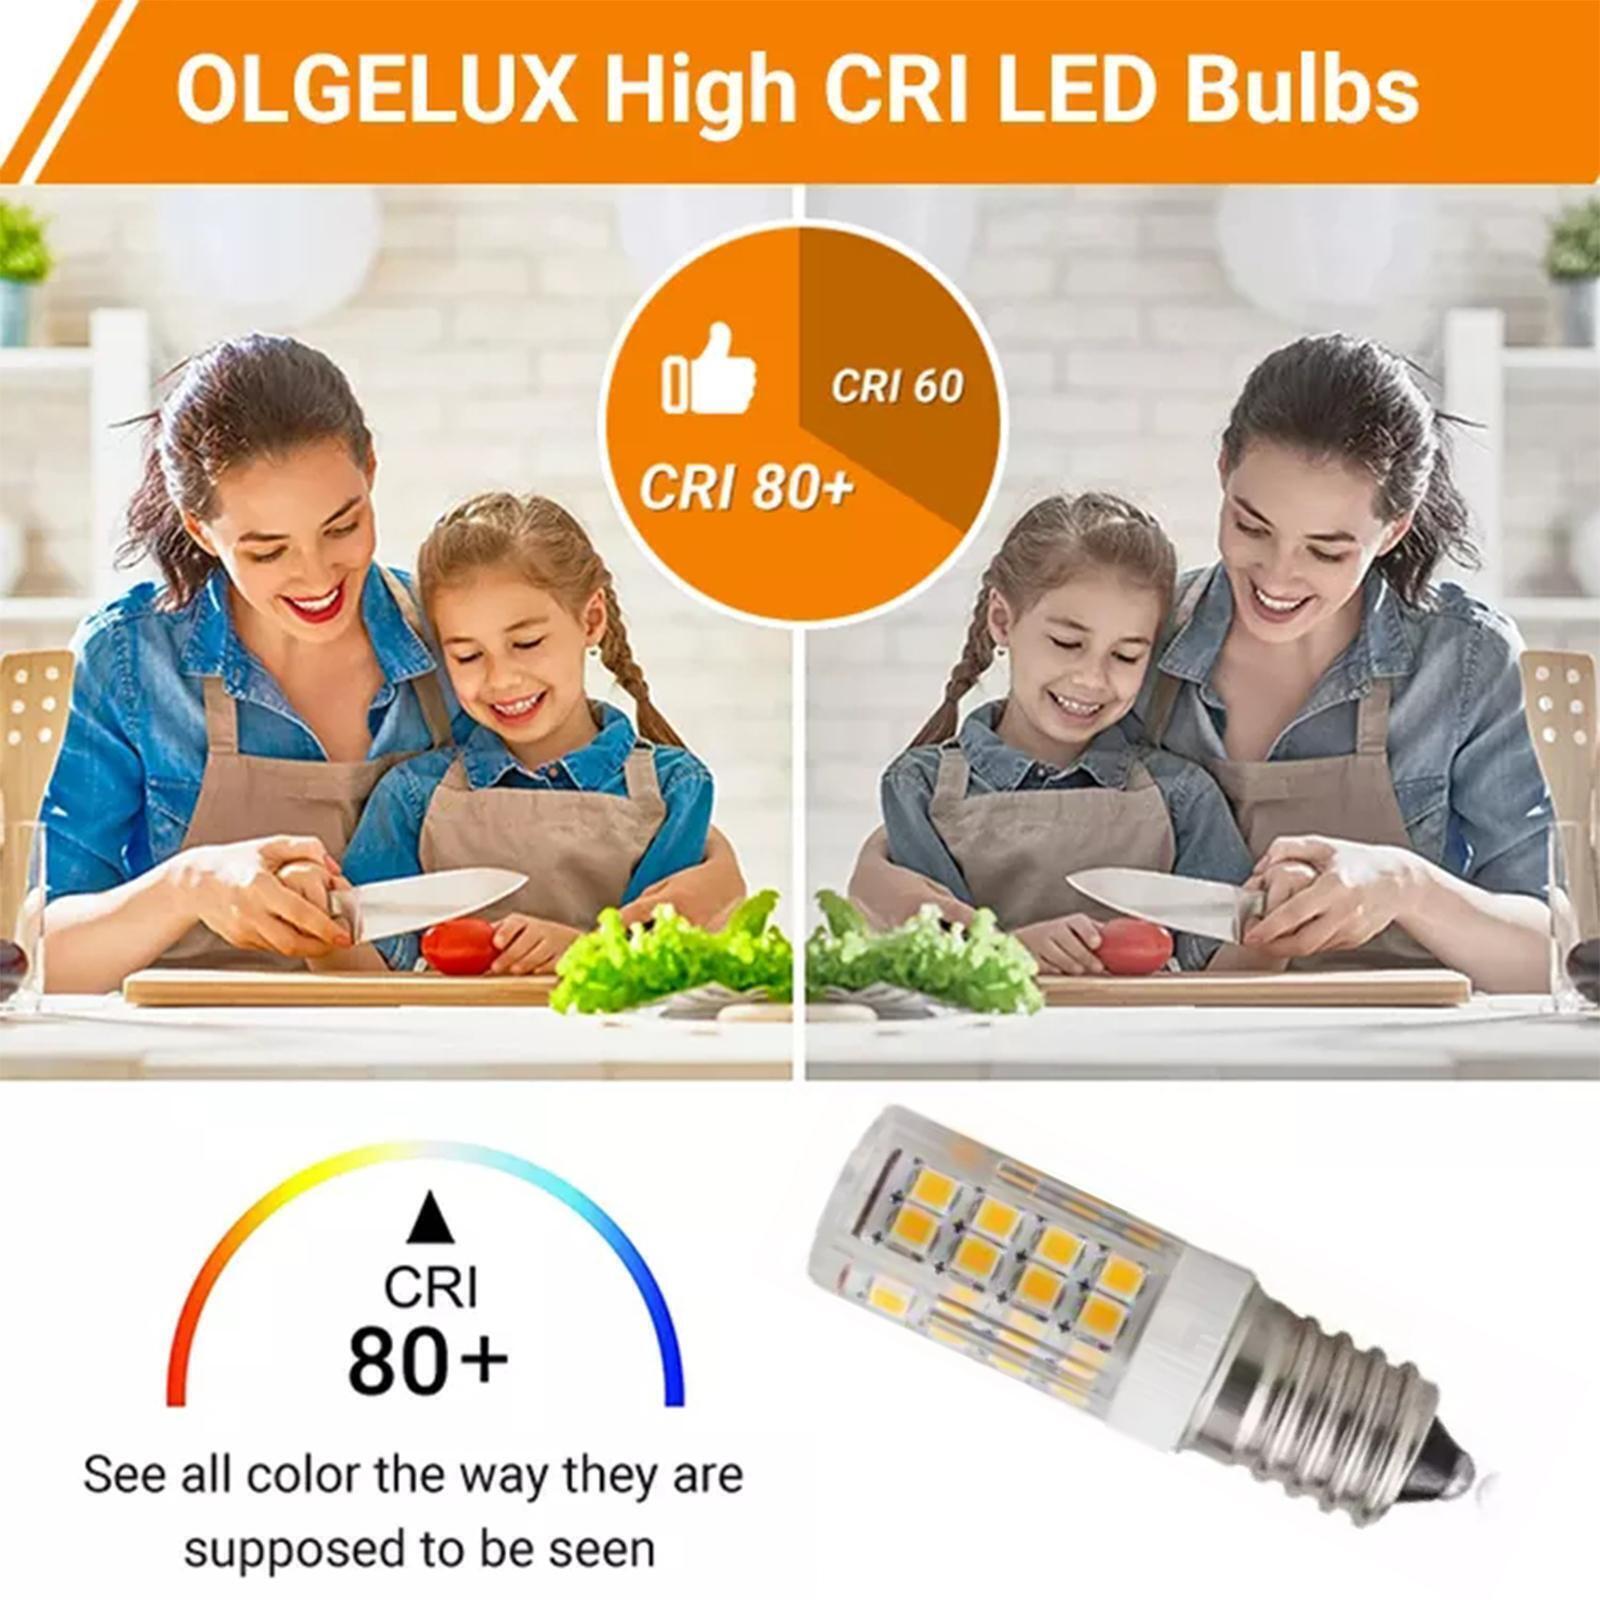 10 Pack LED Corn Bulb E14 2835 SMD Globe Lamp 5W Night Lights For Himalayan Salt Lamps - Office Catch